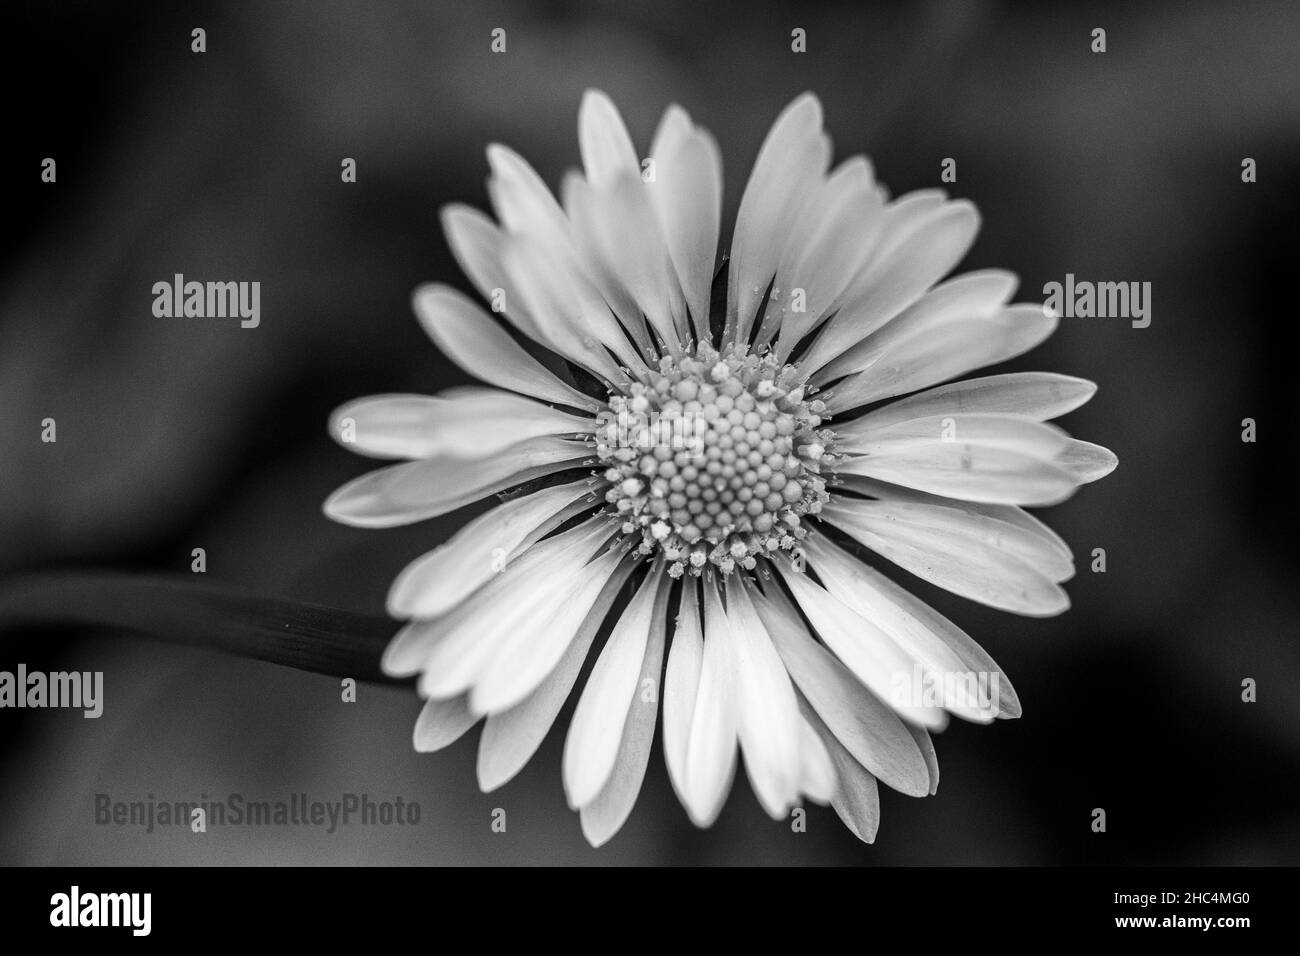 Grayscale shot of a blooming daisy flower Stock Photo - Alamy